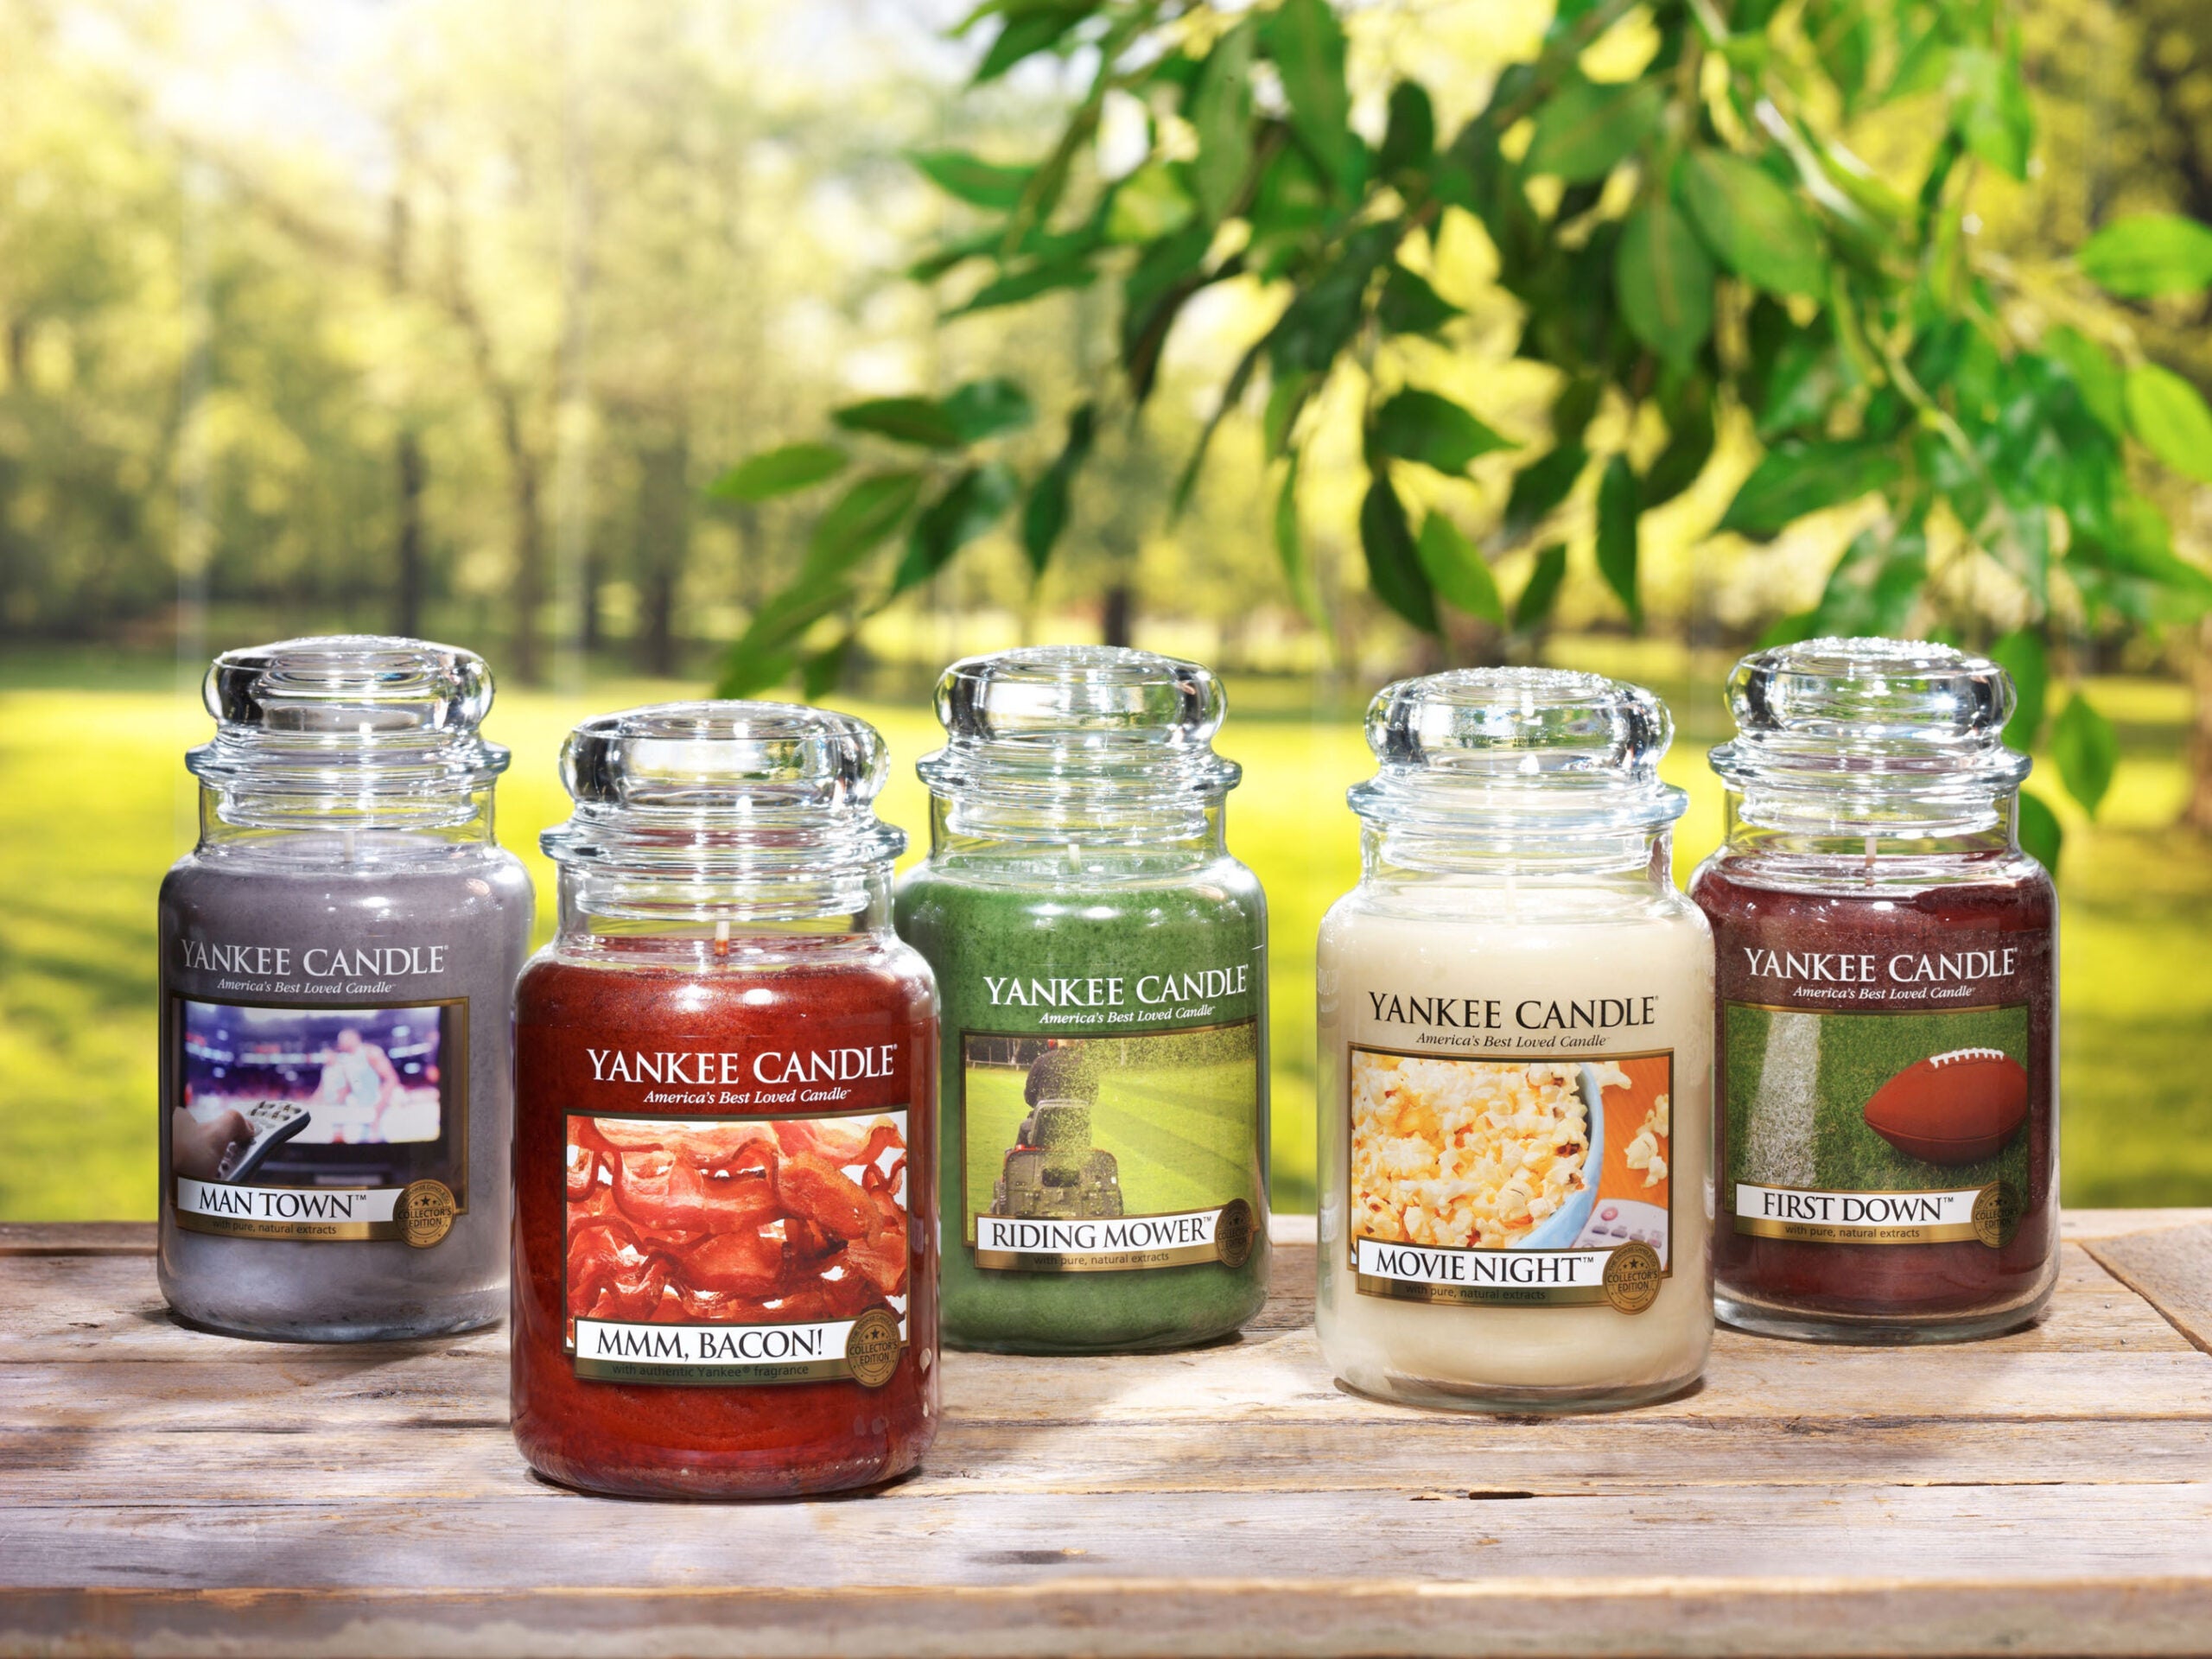 Yankee Candle Agrees to $1.75 Billion Deal - WSJ